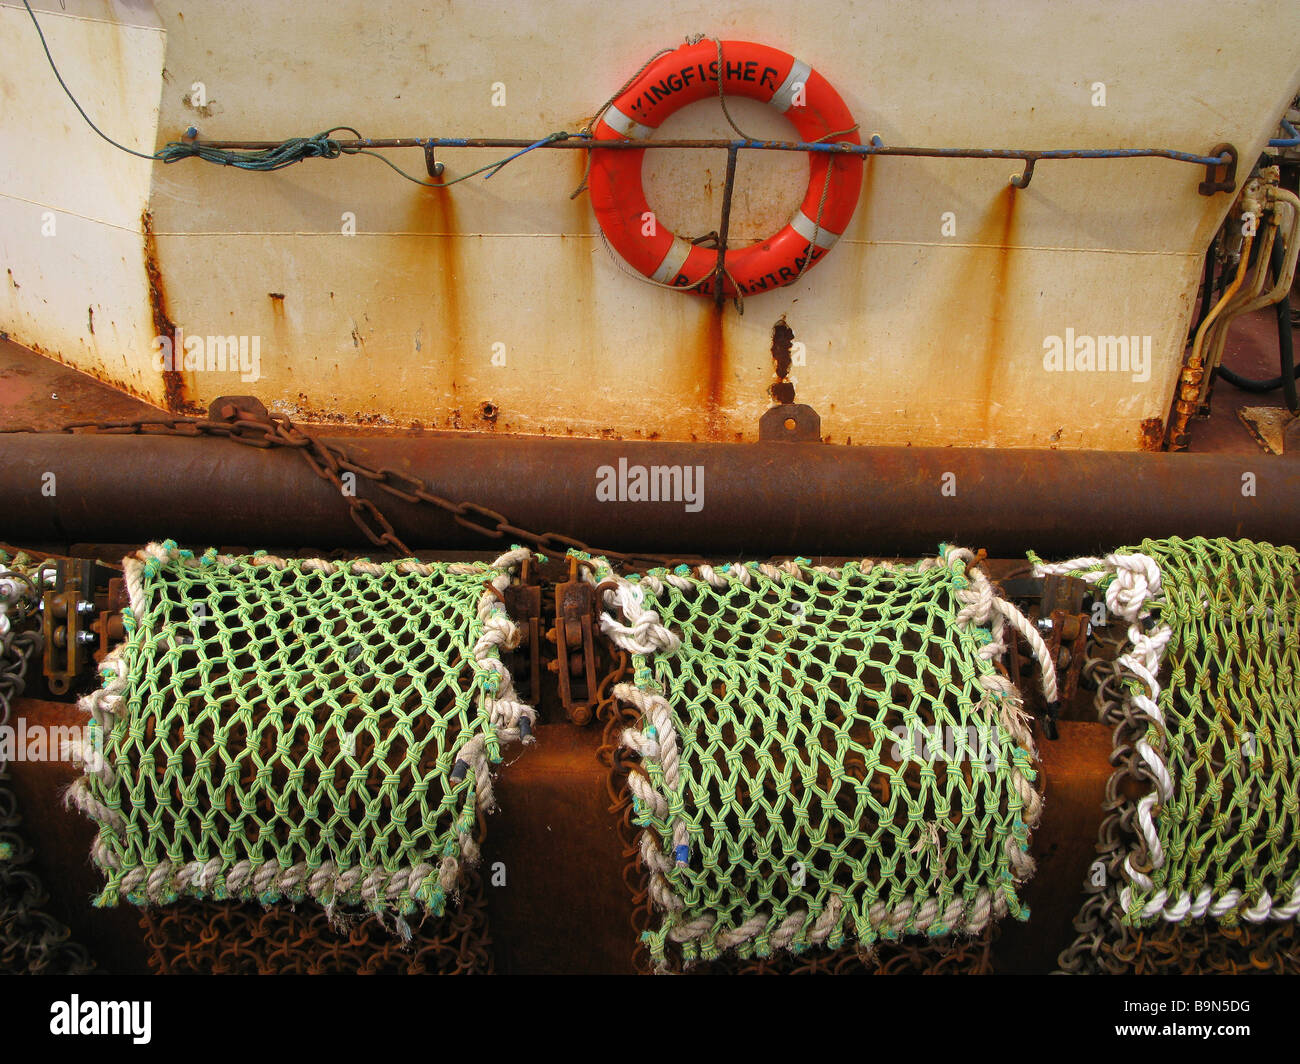 Scallop dredging nets on fishing boat Stock Photo